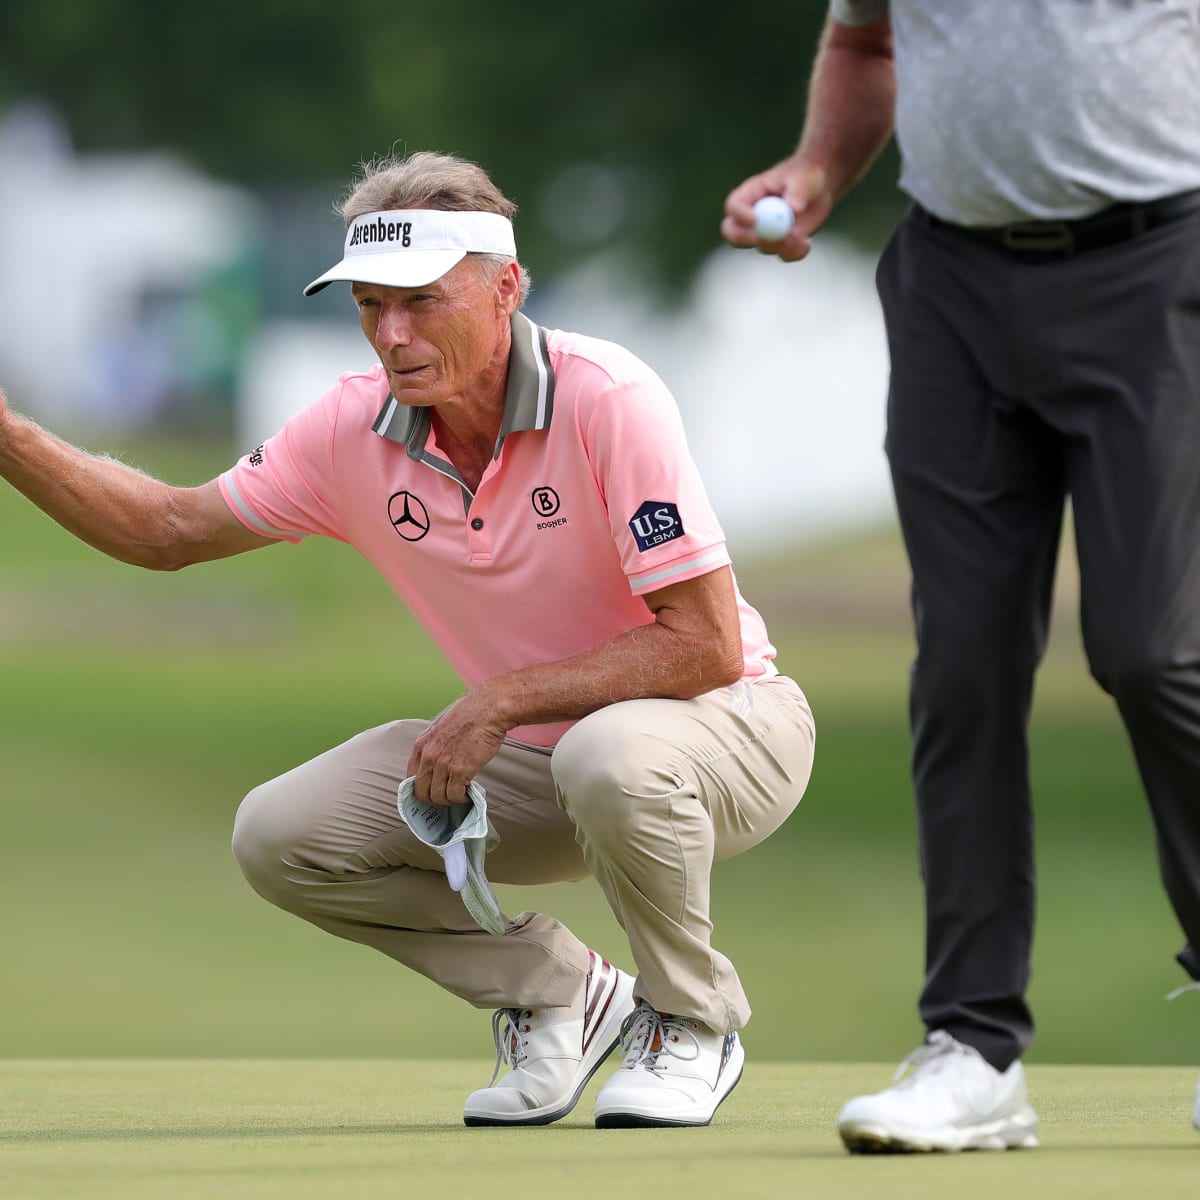 2023 Senior Open: Schedule, top players, prize money purse, and more